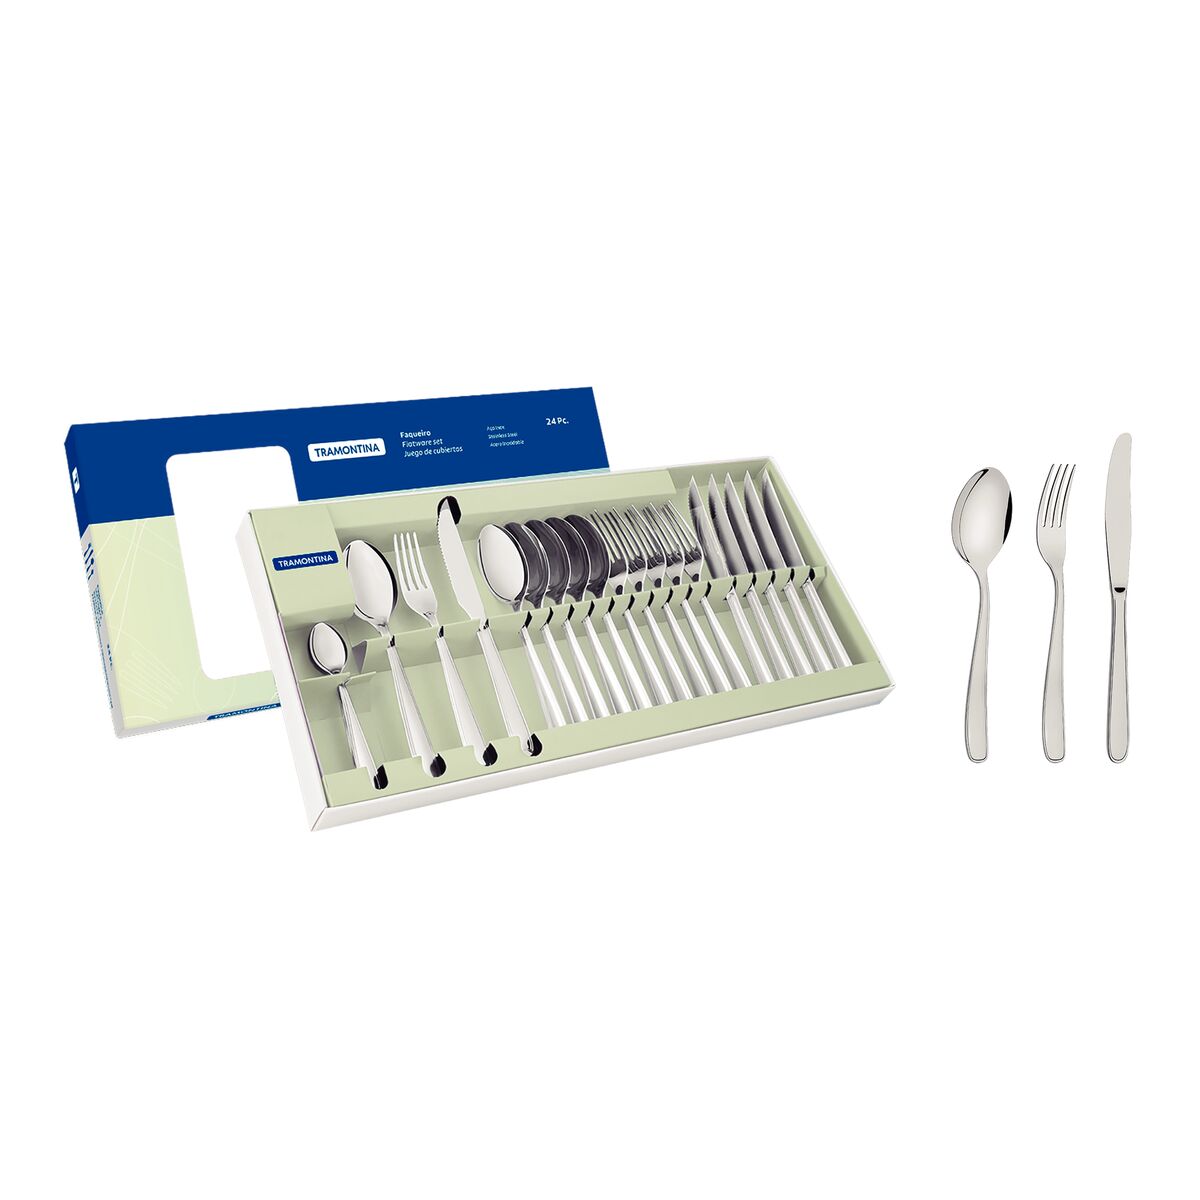 Tramontina Maresias stainless steel flatware set with table knives and mirror finish, 24 pc set